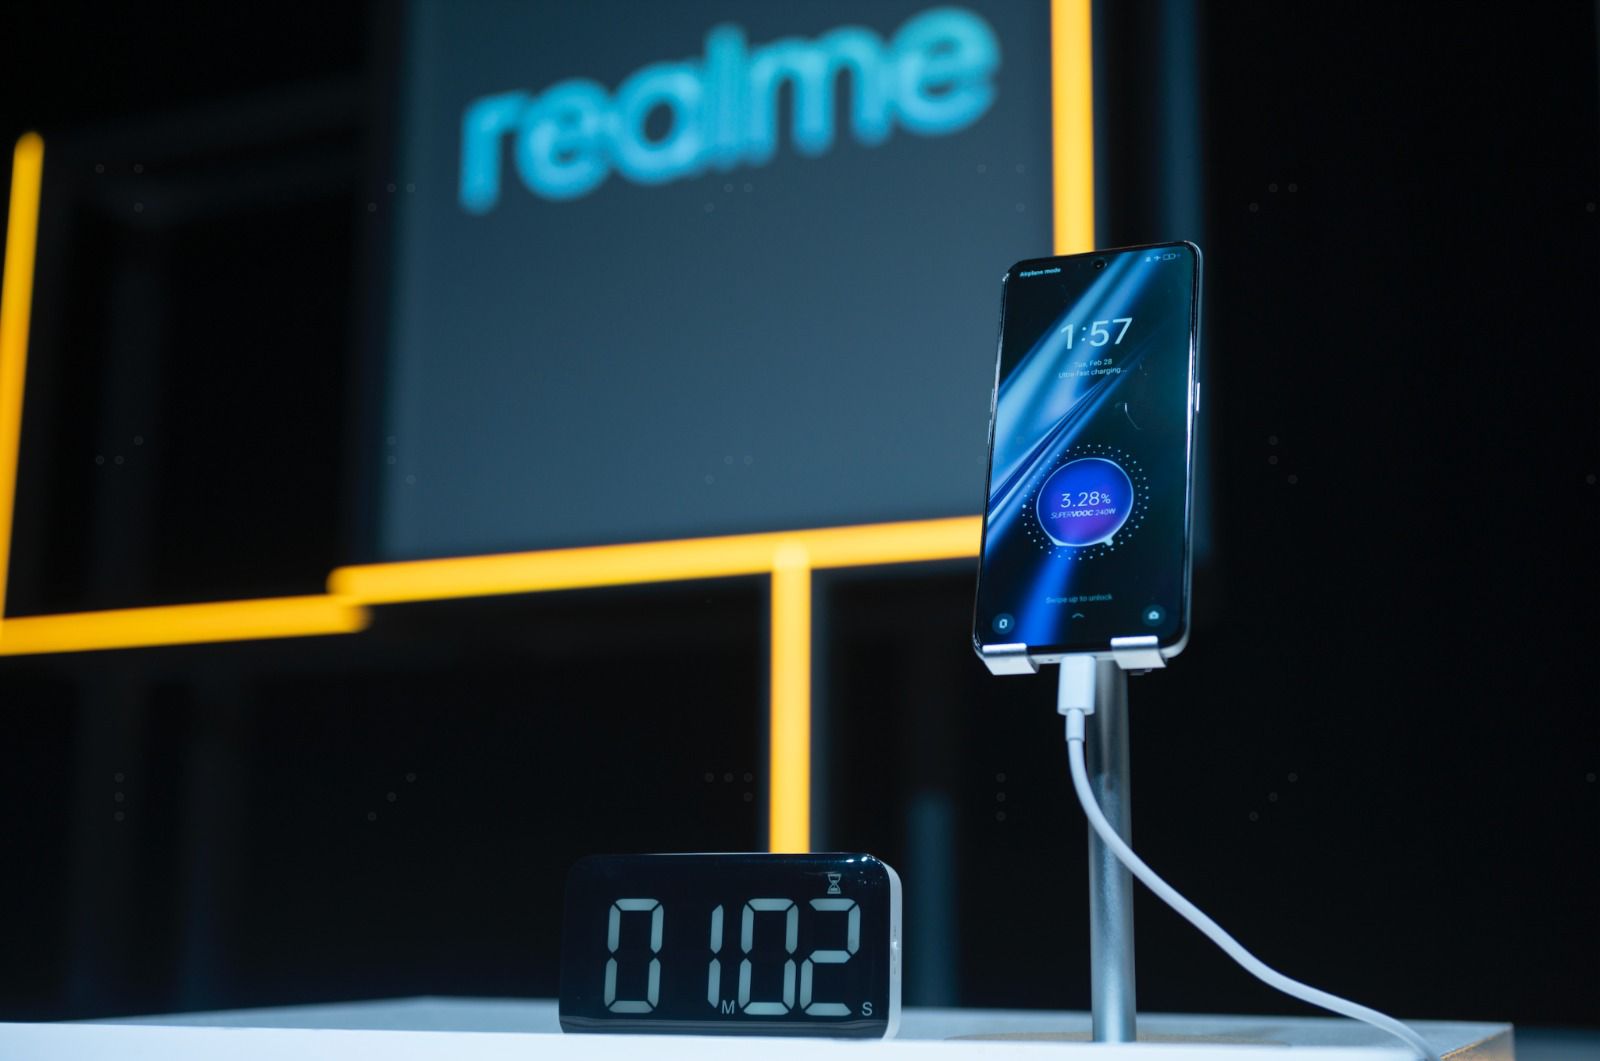 realme GT3 240W  The World Fastest Charging 